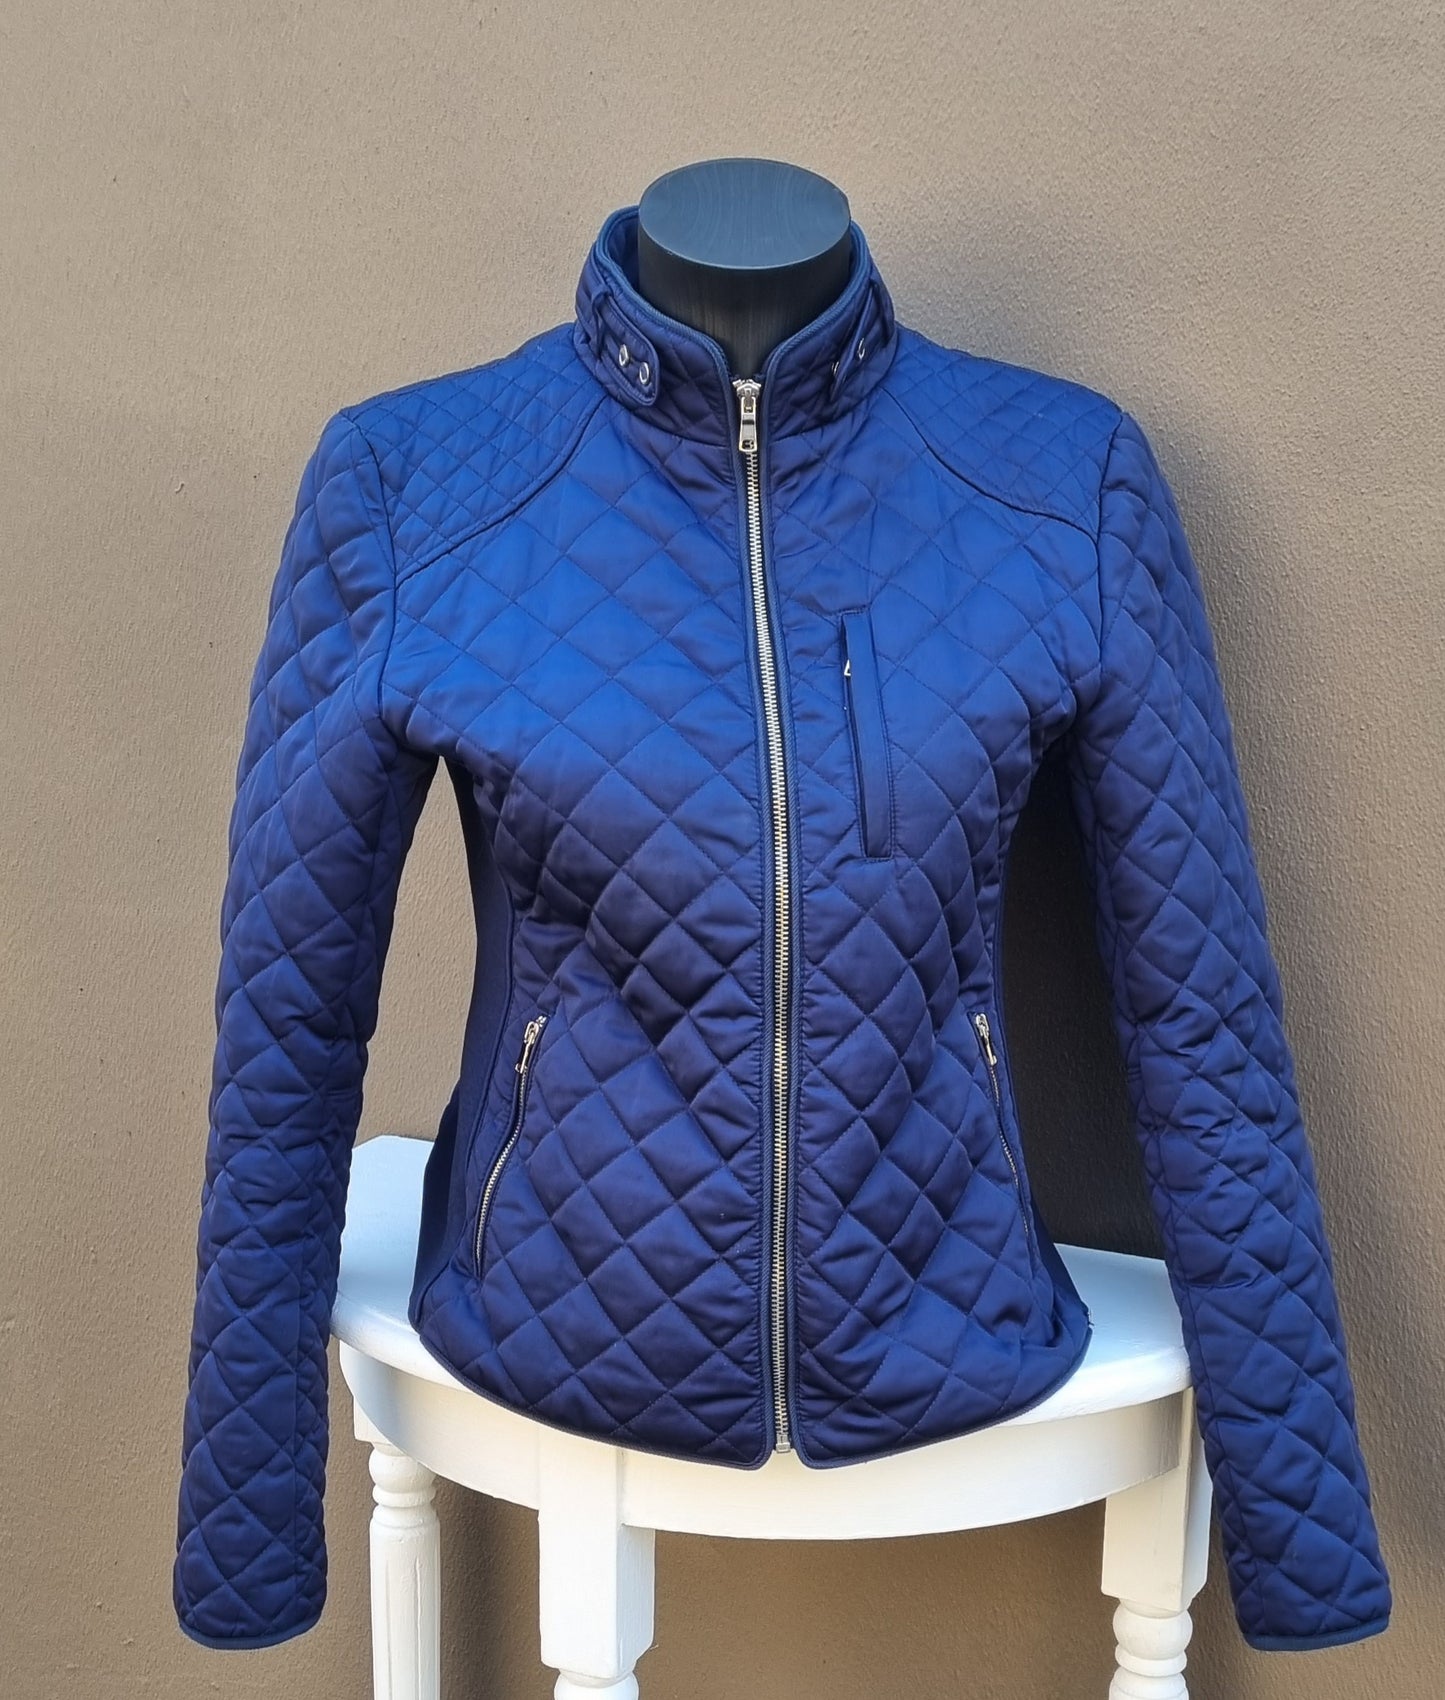 Zara Woman - Blue quilted mid waist jacket with front zip and size zip pockets